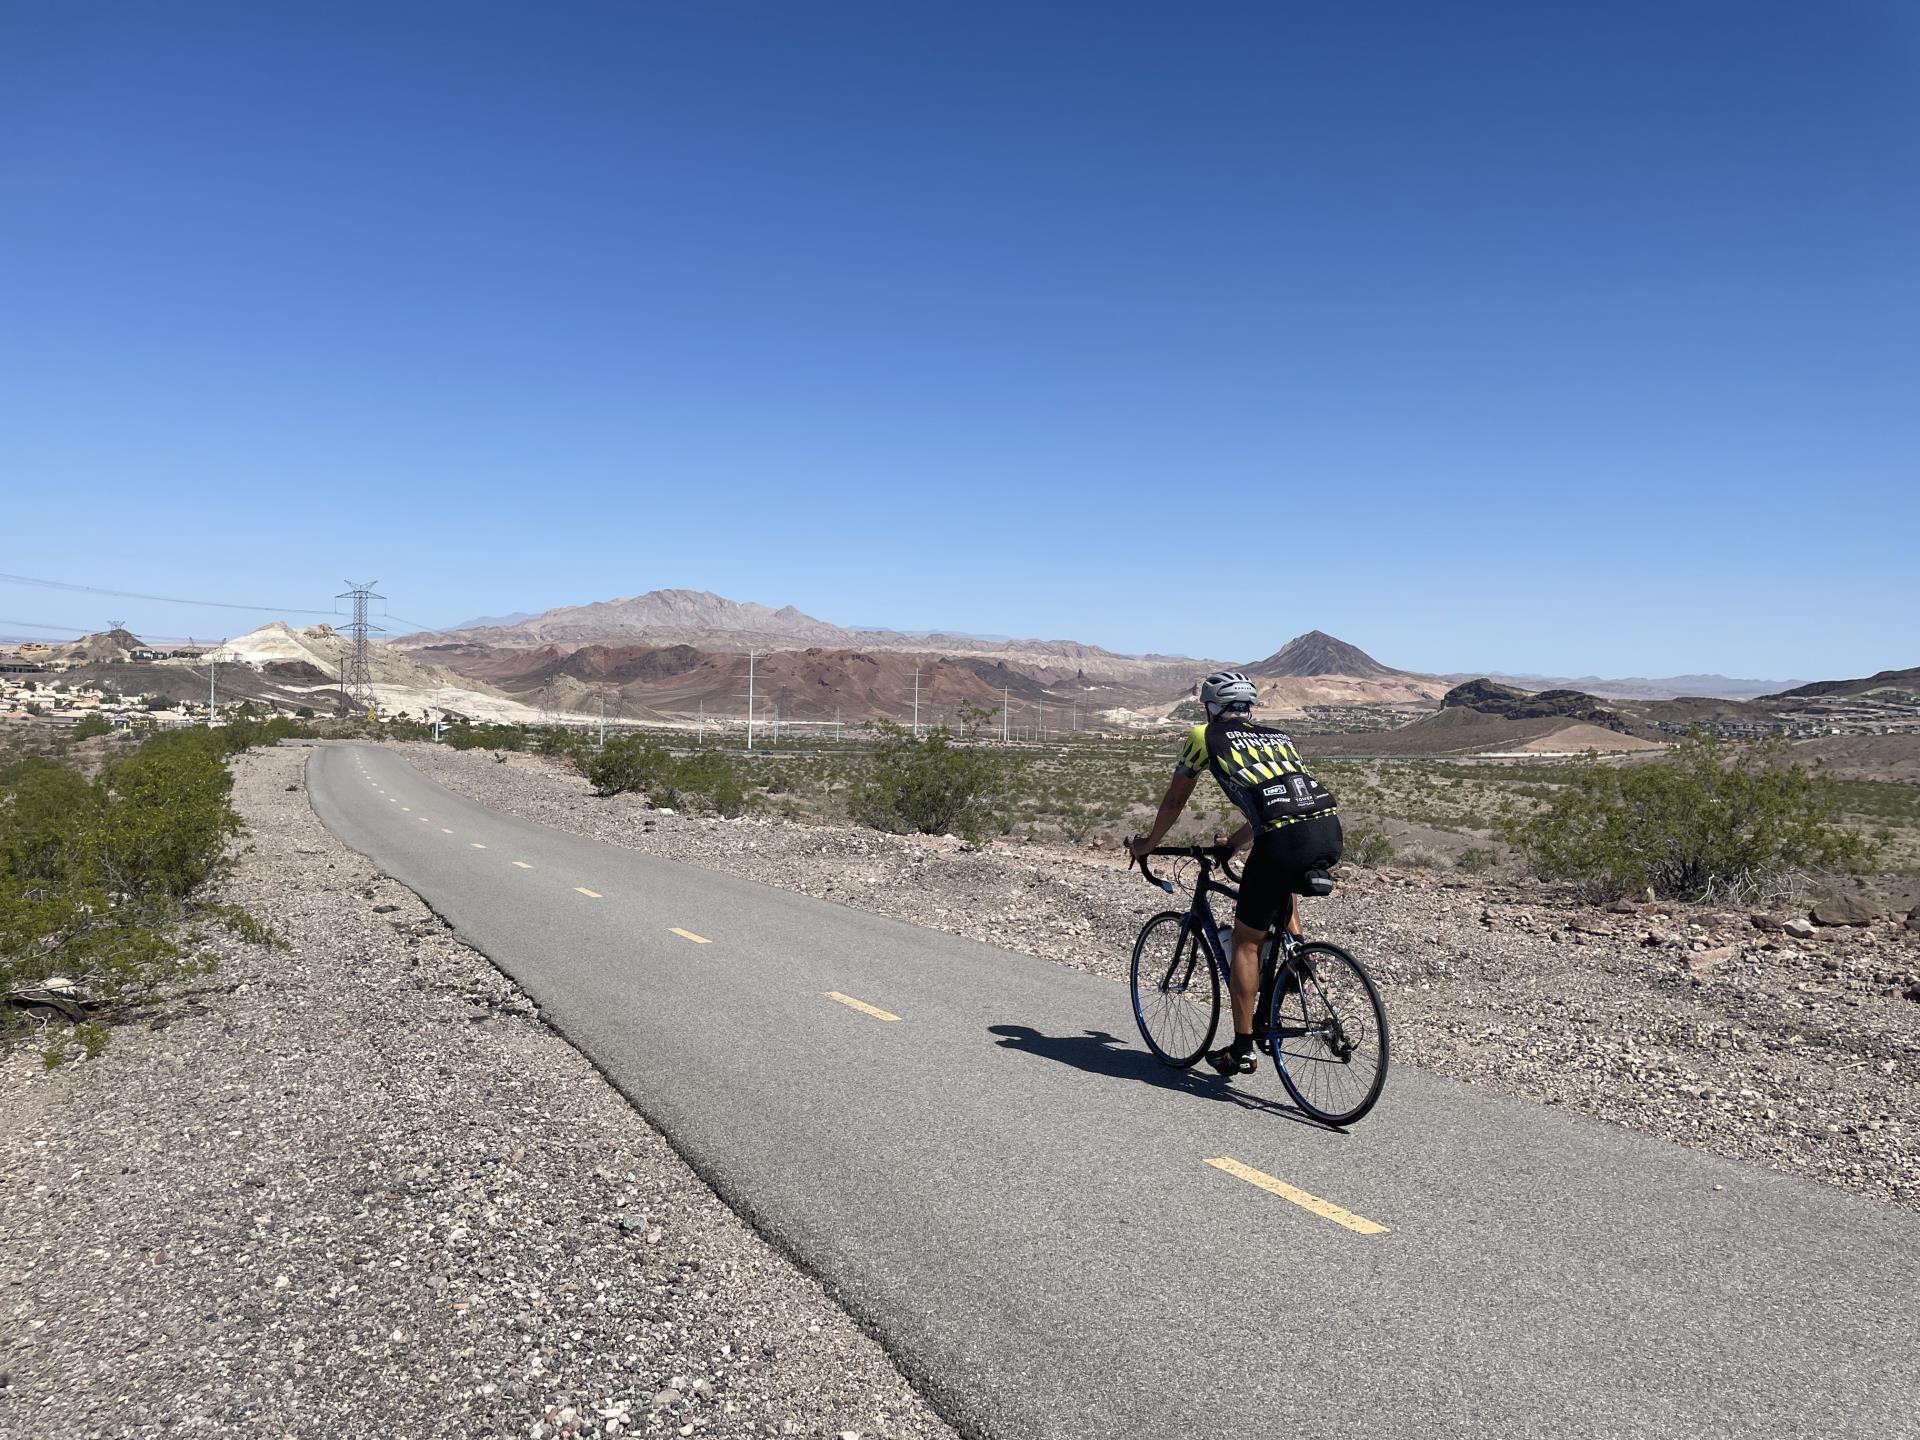 bicyclist riding on trail in desert